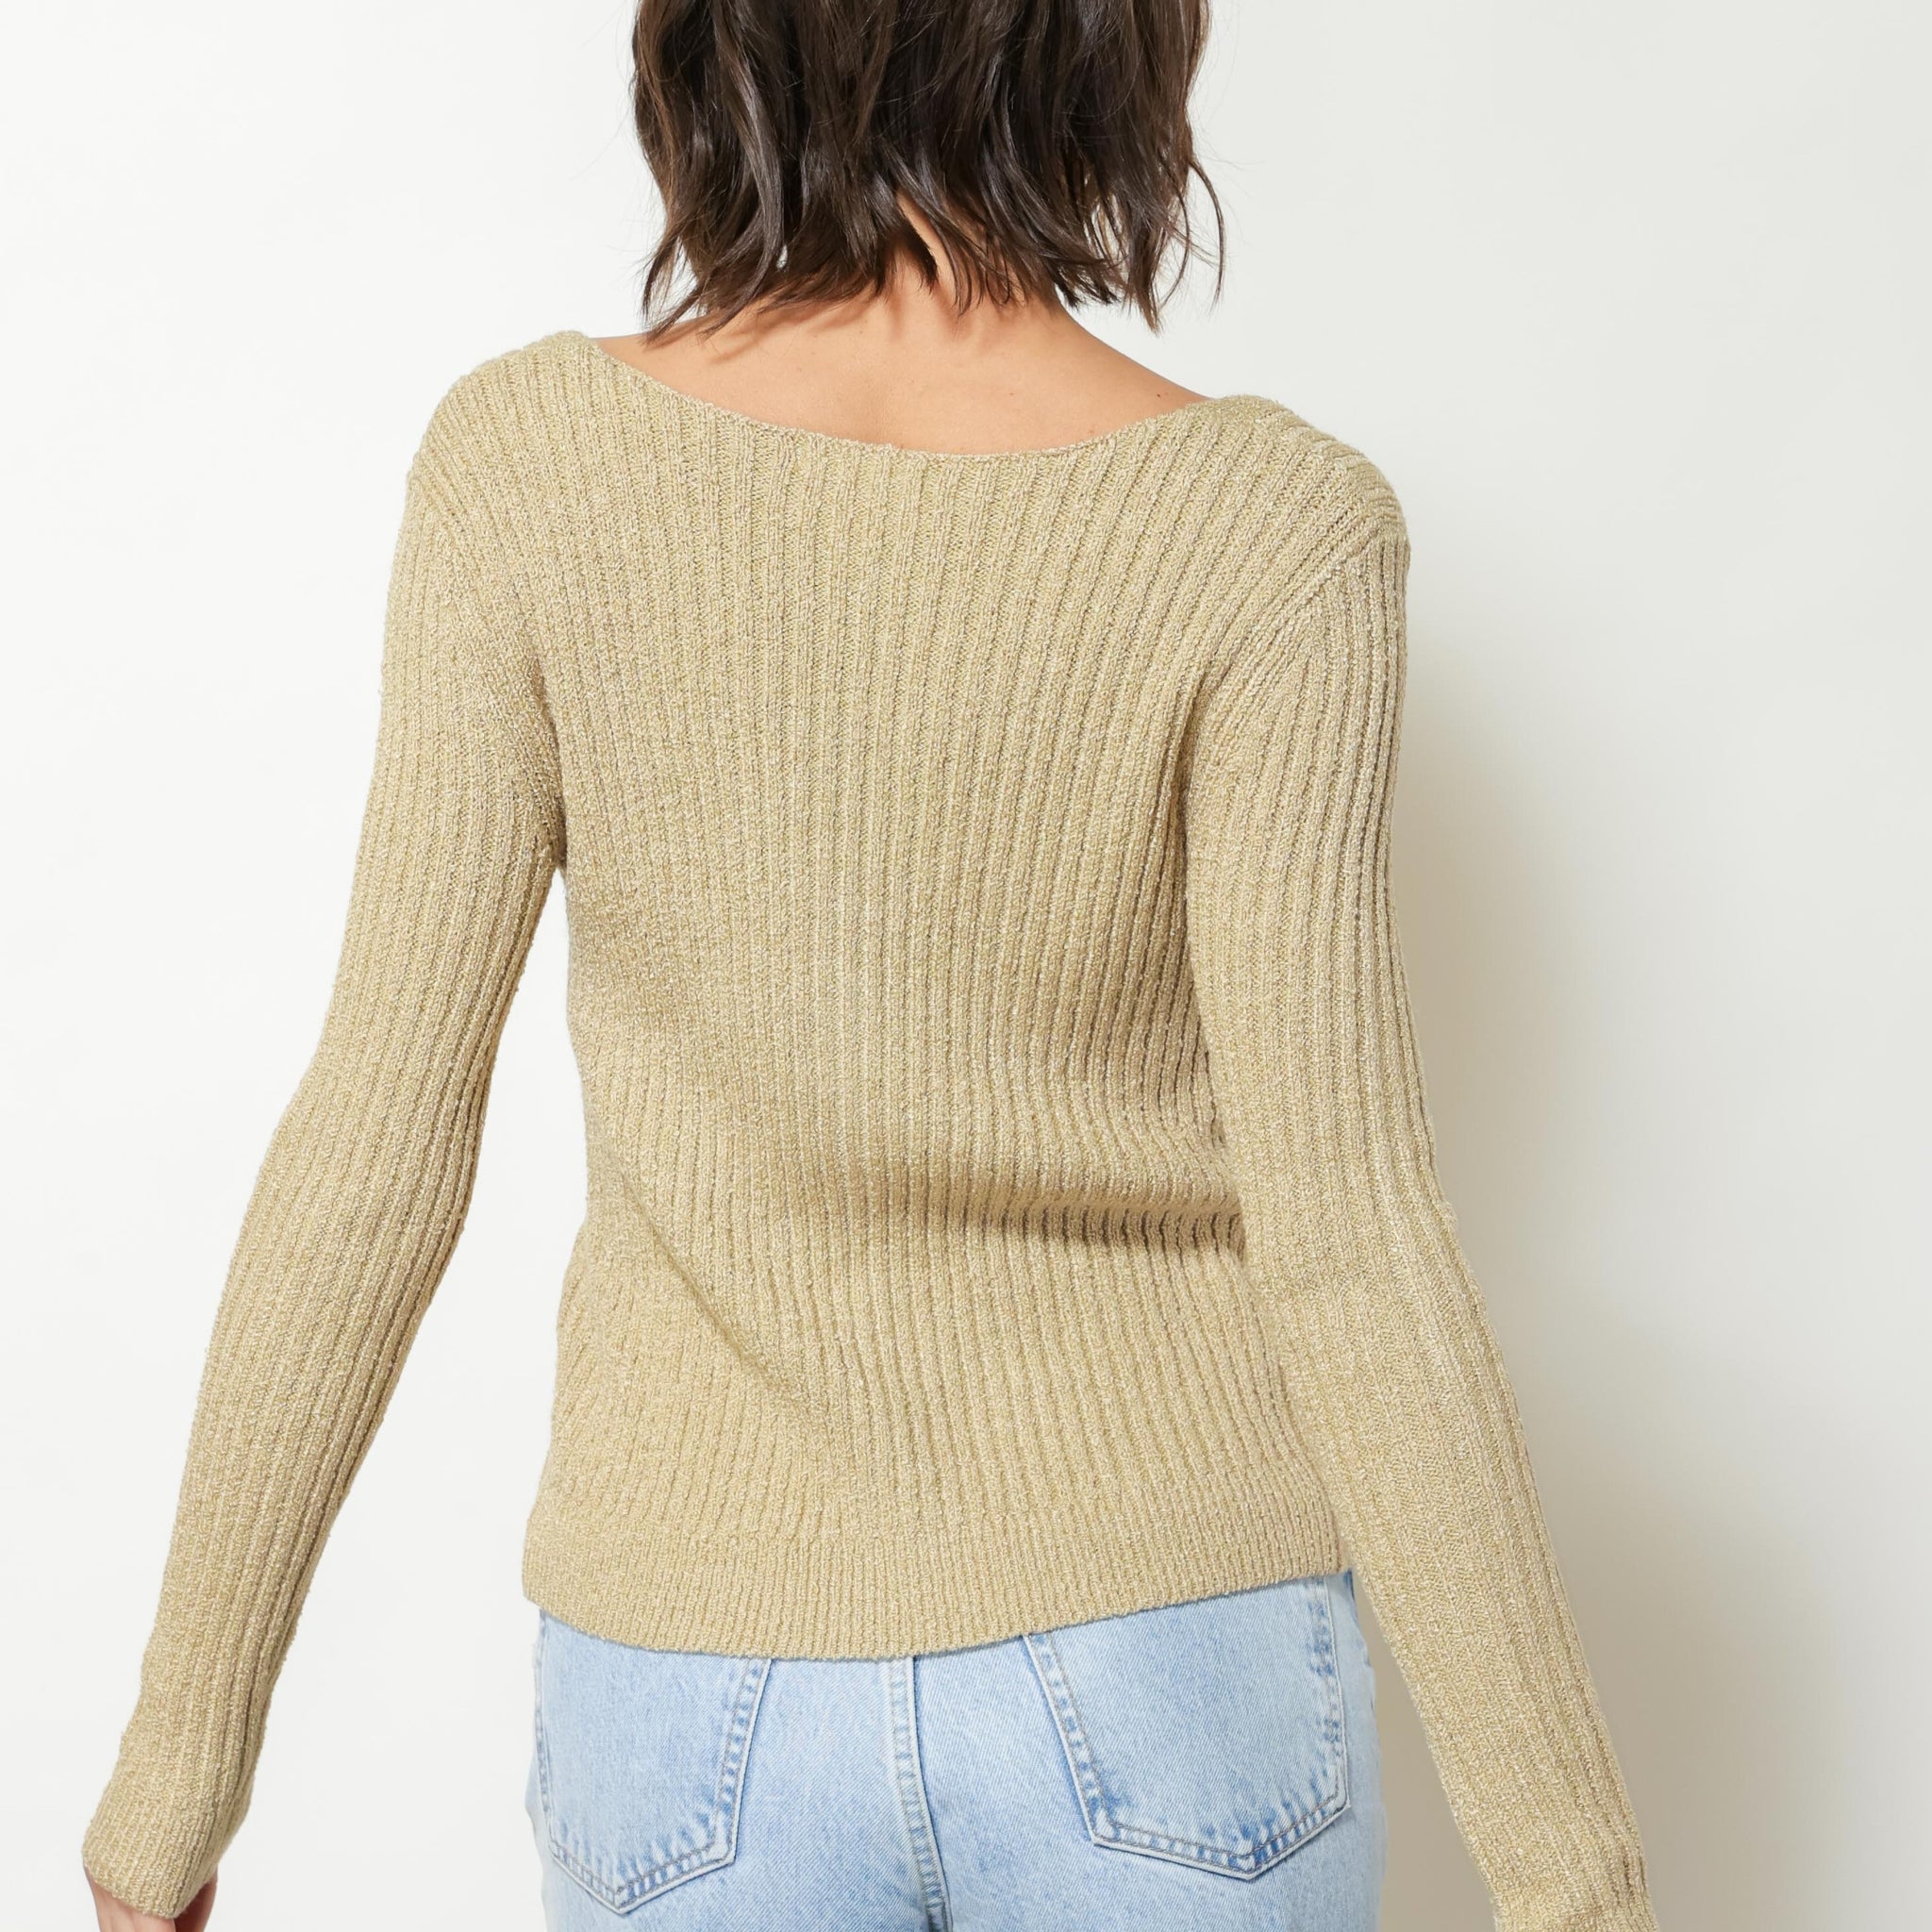 KENDALL SWEATER LONG SLEEVE TOP